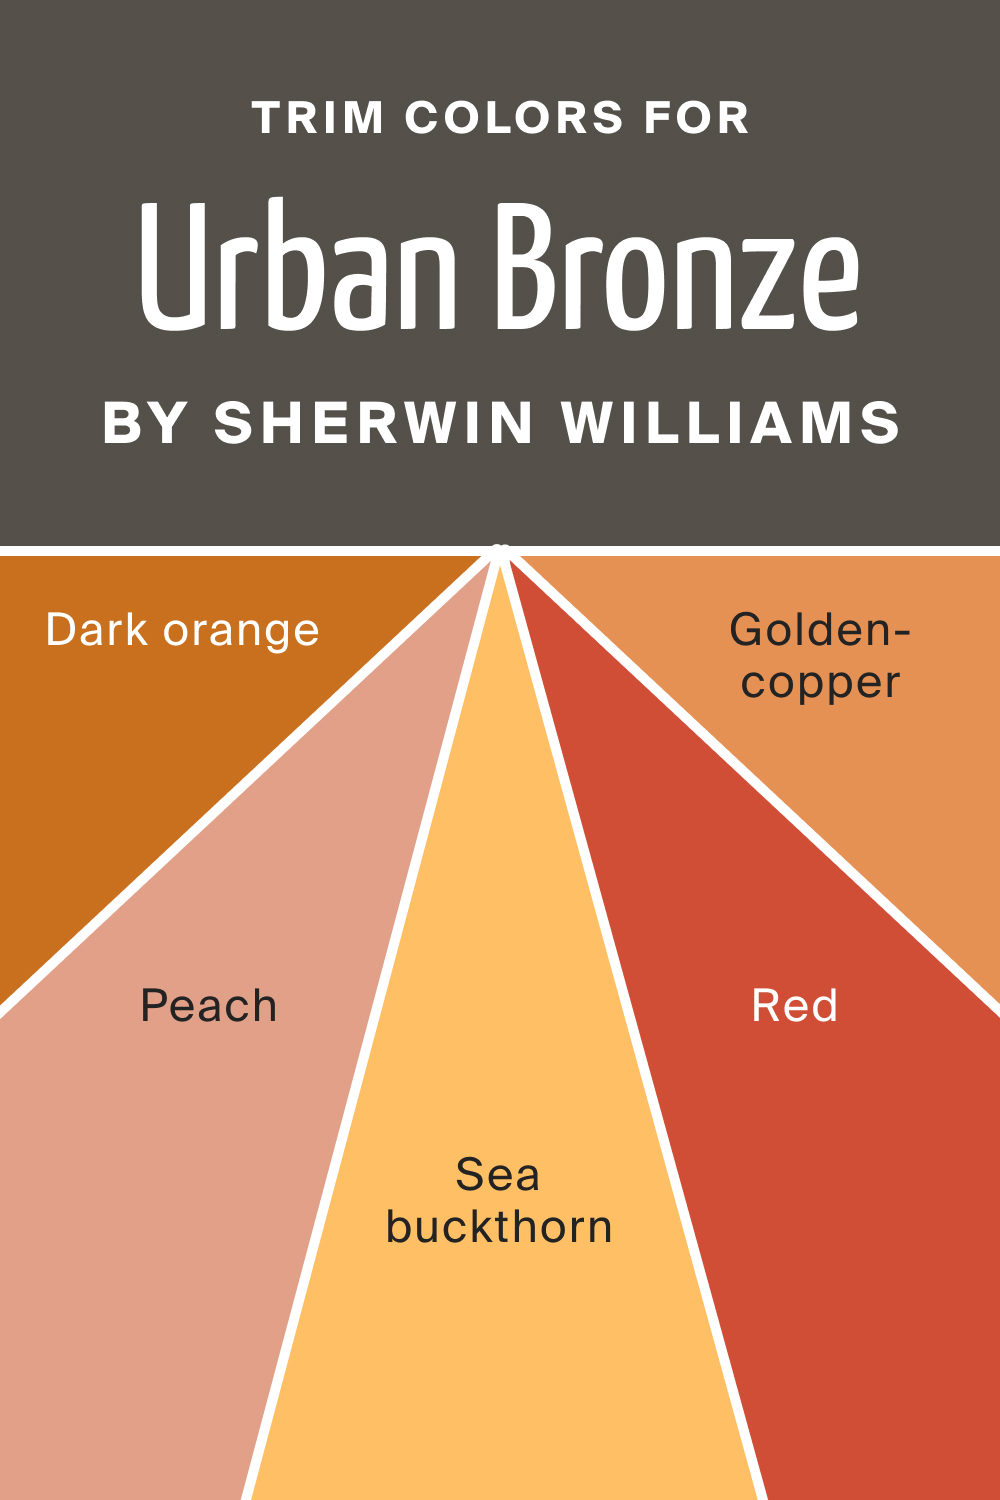 Best Trim Color Pairs For Urban Bronze by Sherwin Williams